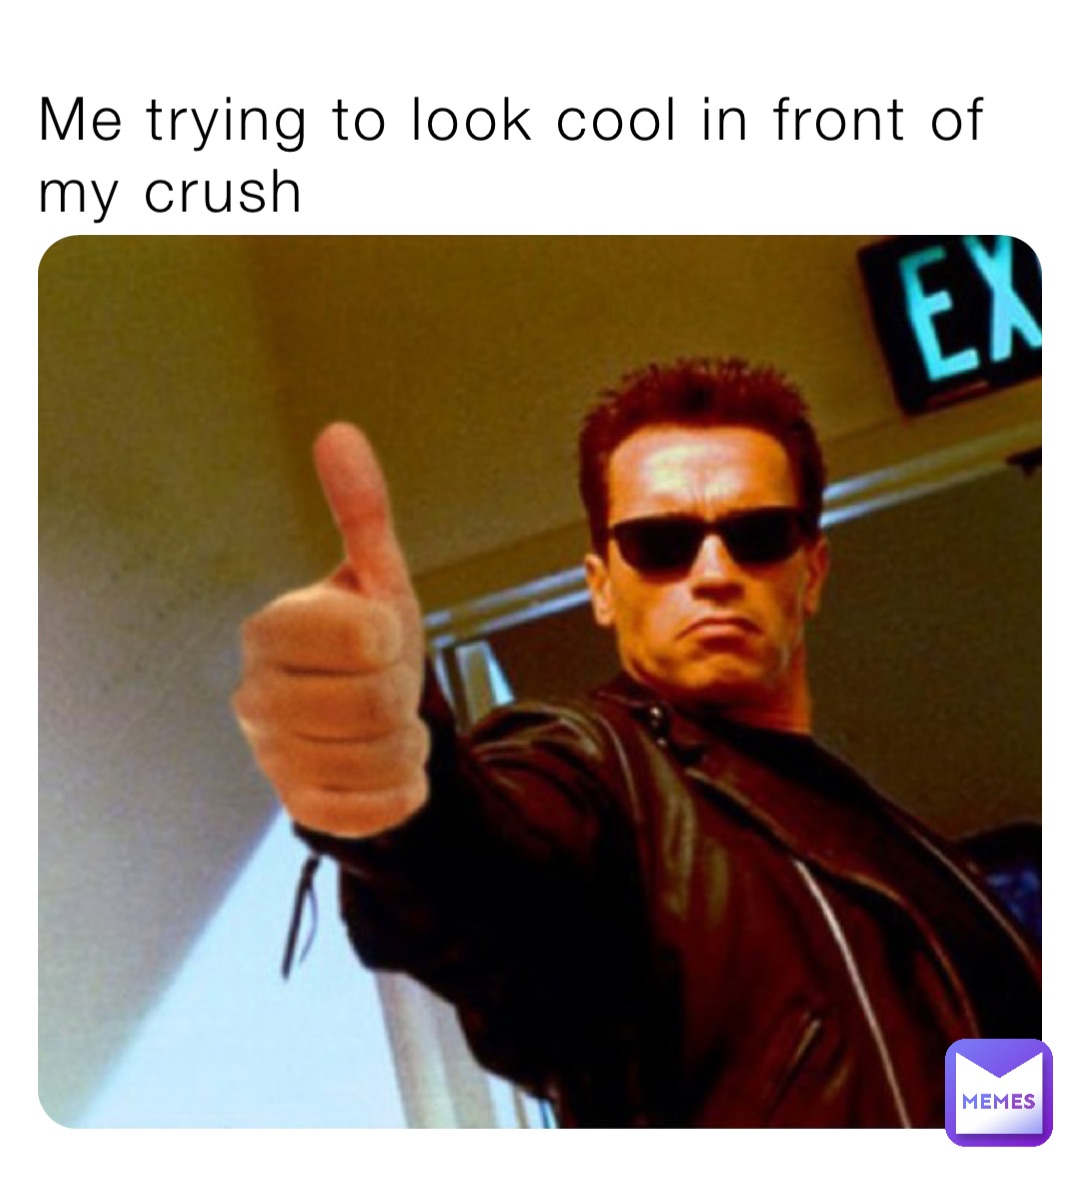 Me trying to look cool in front of my crush